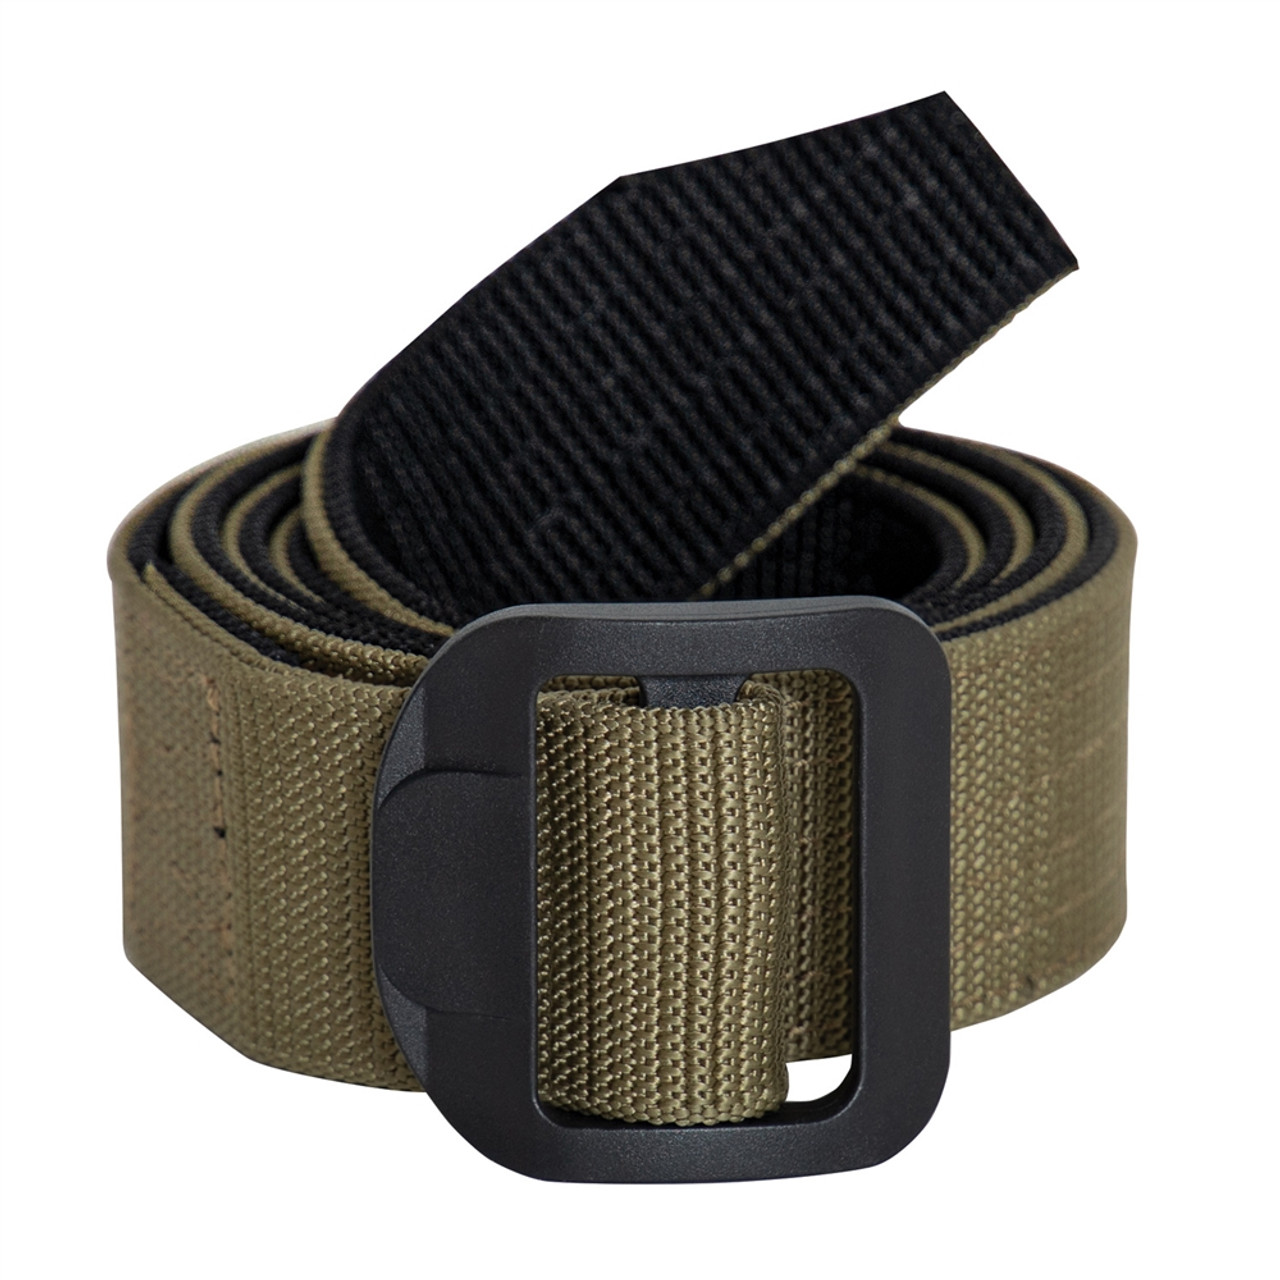 Reversible Airport Friendly Riggers Belt - Black / Coyote from Hessen Military